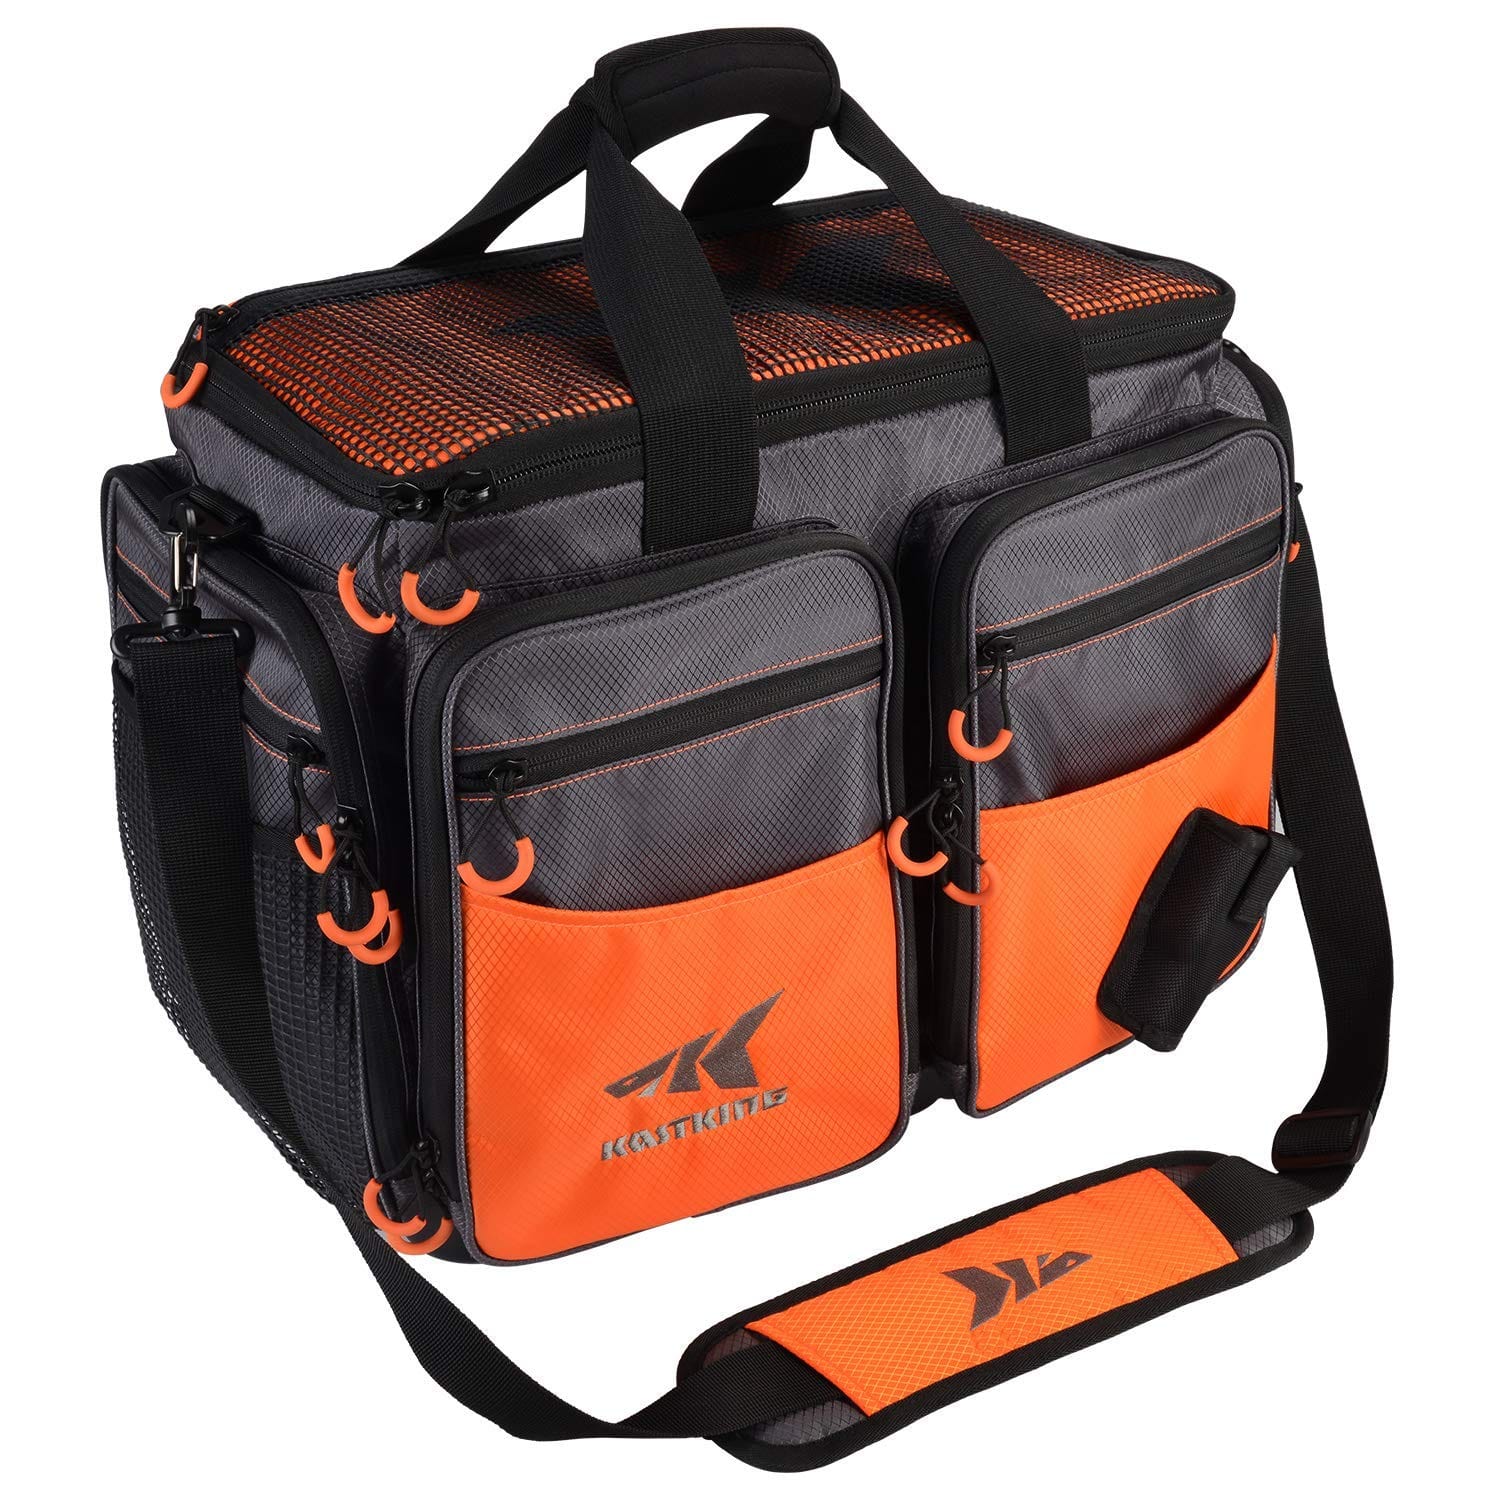 Bait Sackmultifunctional Fishing Tackle Bag 1680d Oxford 4-layer